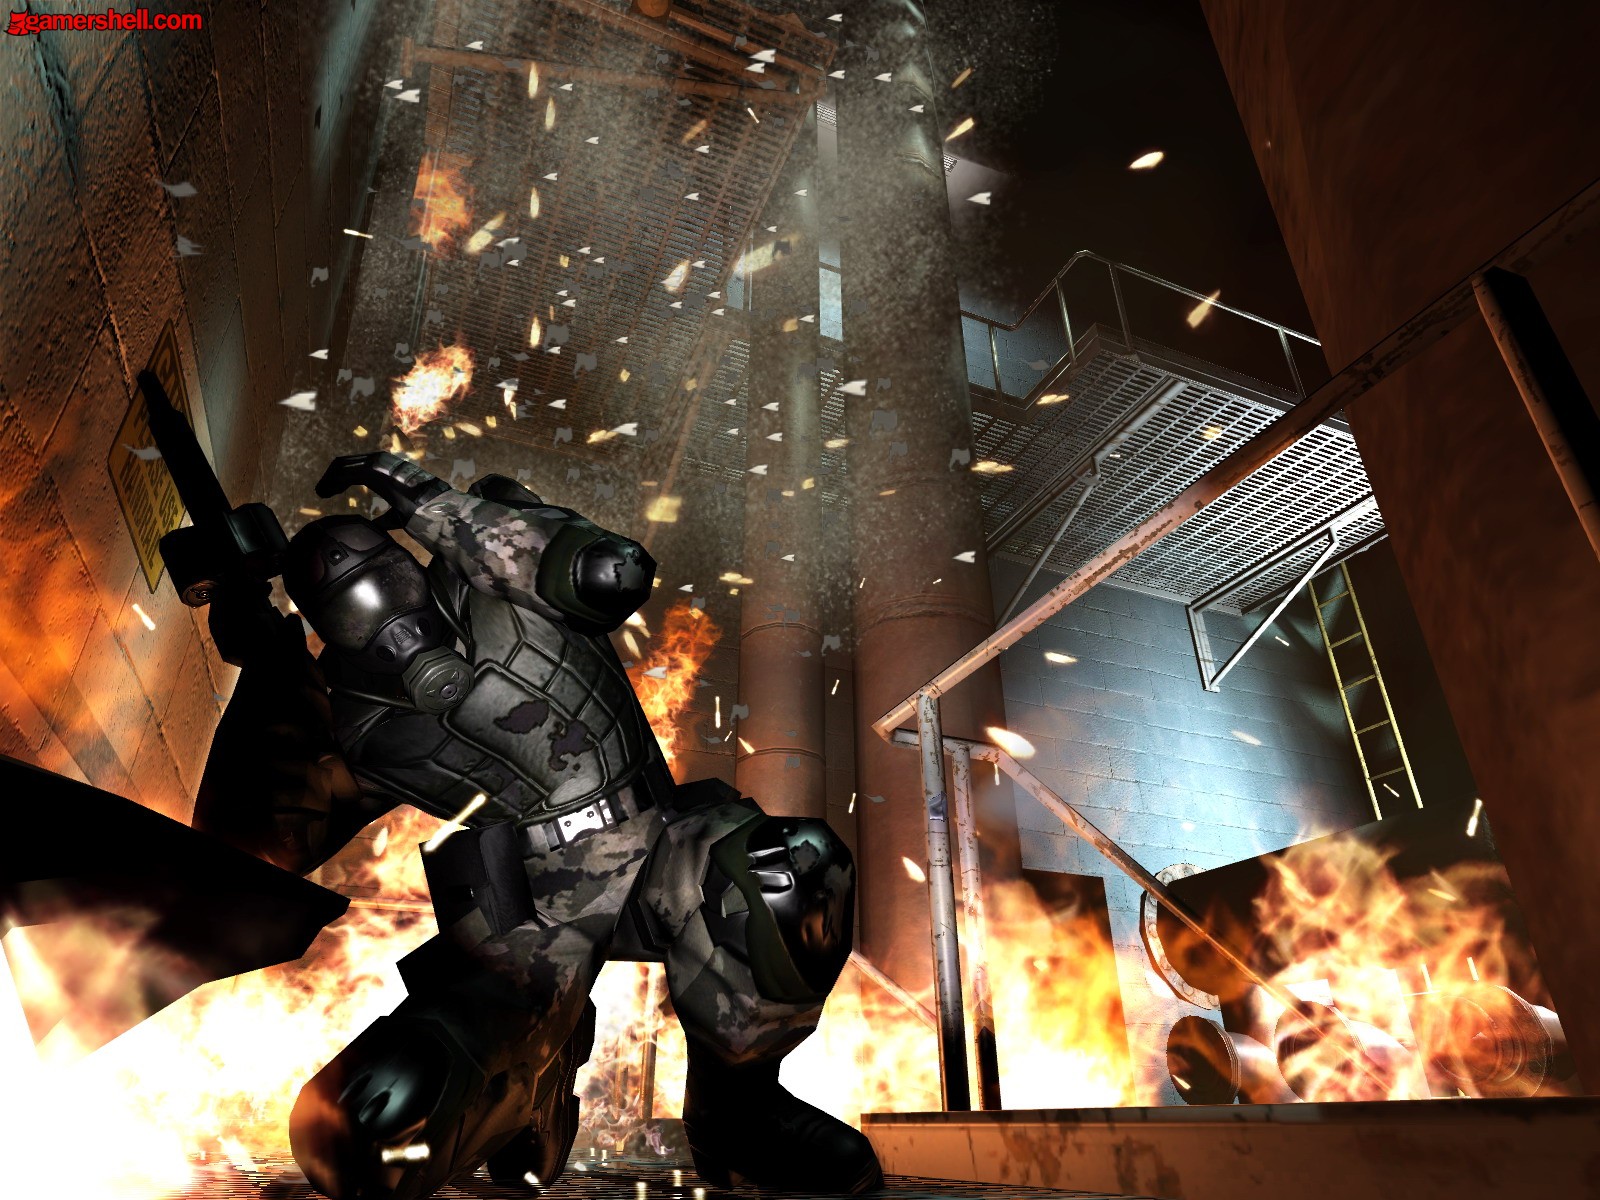 Soldier wearing a mask amidst a fiery explosion with bombs and rifles, from the F.E.A.R. video game.